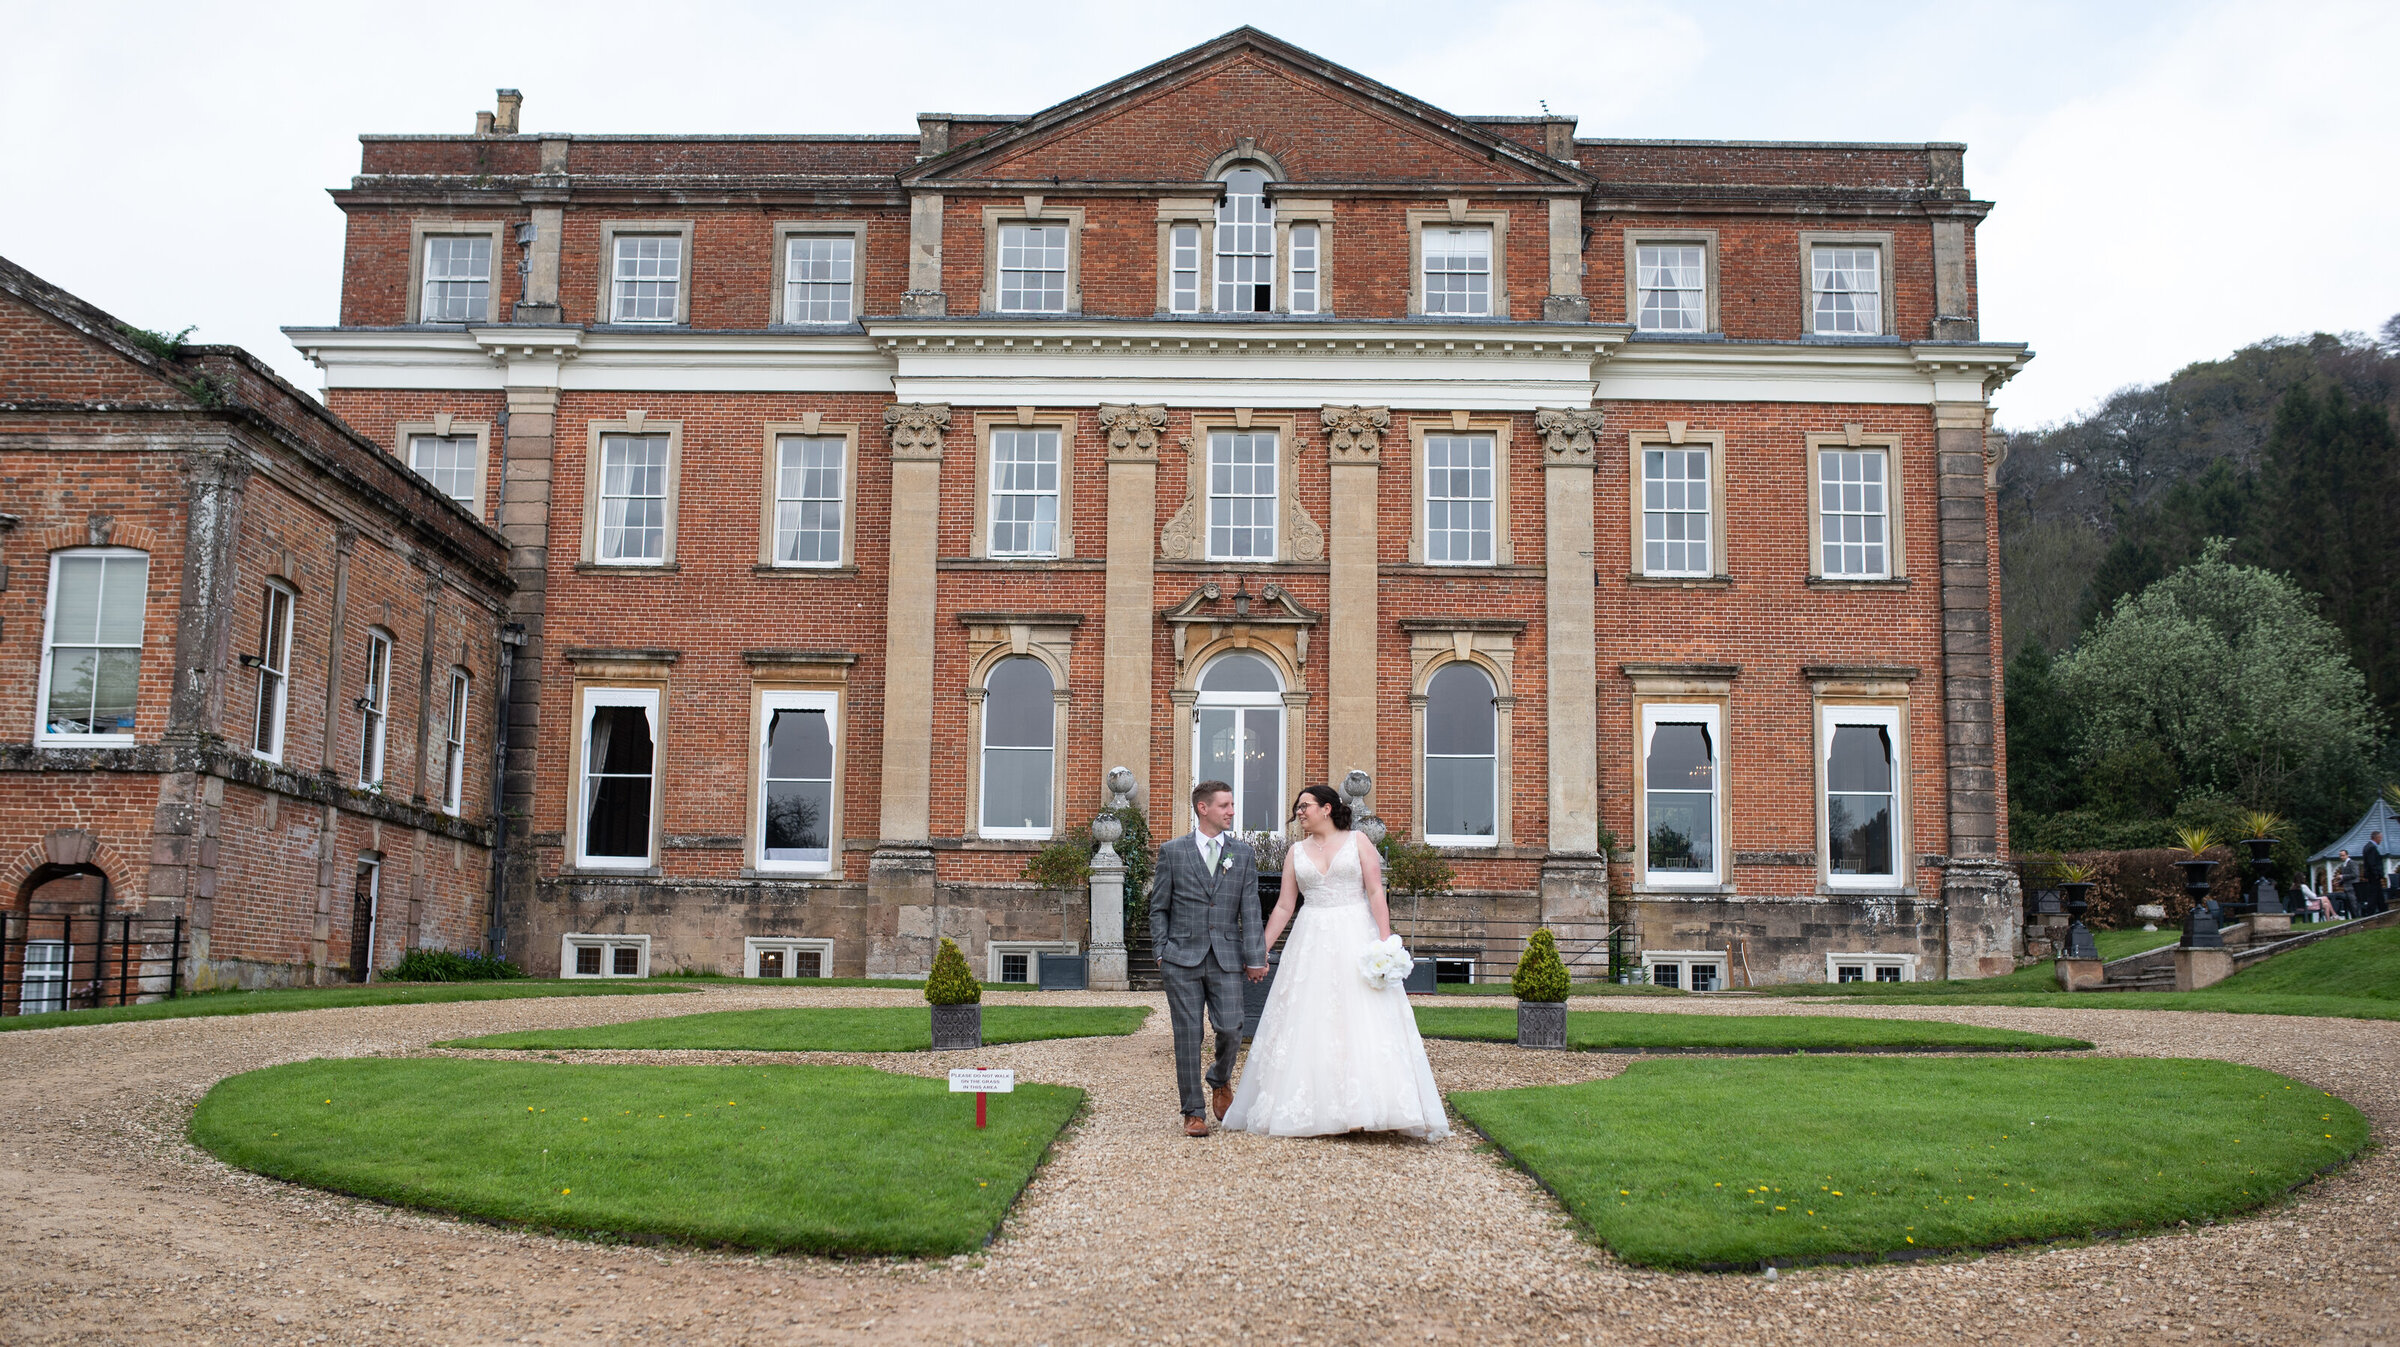 Bride and Groom in wedding attire walking together holding hands in front of Crowcombe Court wedding venue